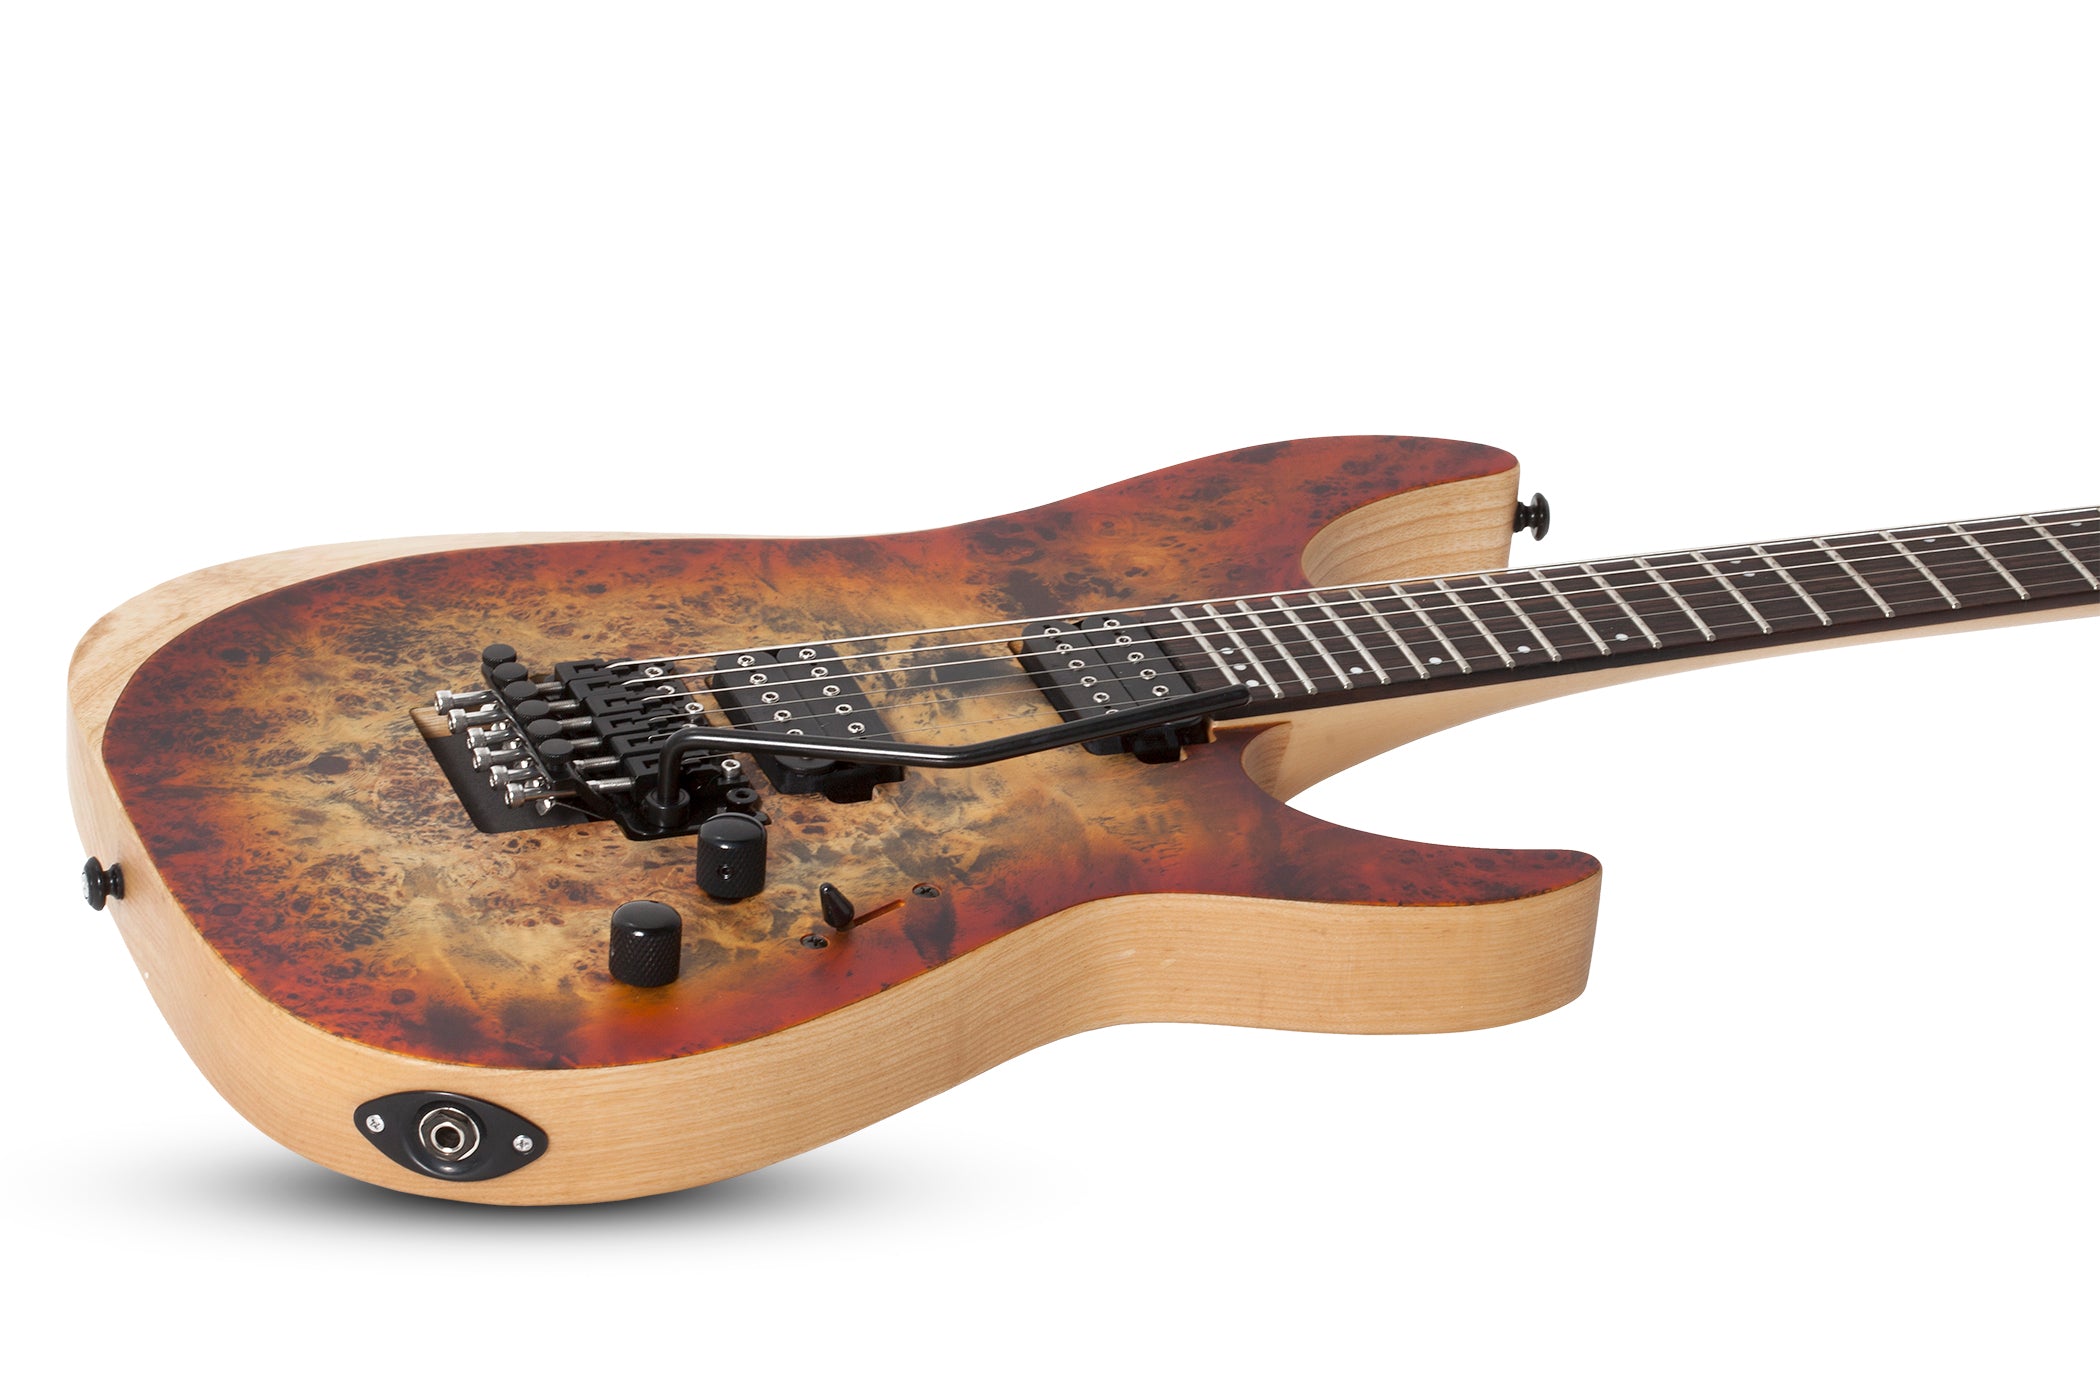 SCHECTER REAPER-6 FLOYD ROSE ELECTRIC GUITAR SATIN INFERNO BURST (1505) MADE IN INDONESIA, SCHECTER, ELECTRIC GUITAR, schecter-electric-guitar-reaper-6-fr-sfb, ZOSO MUSIC SDN BHD